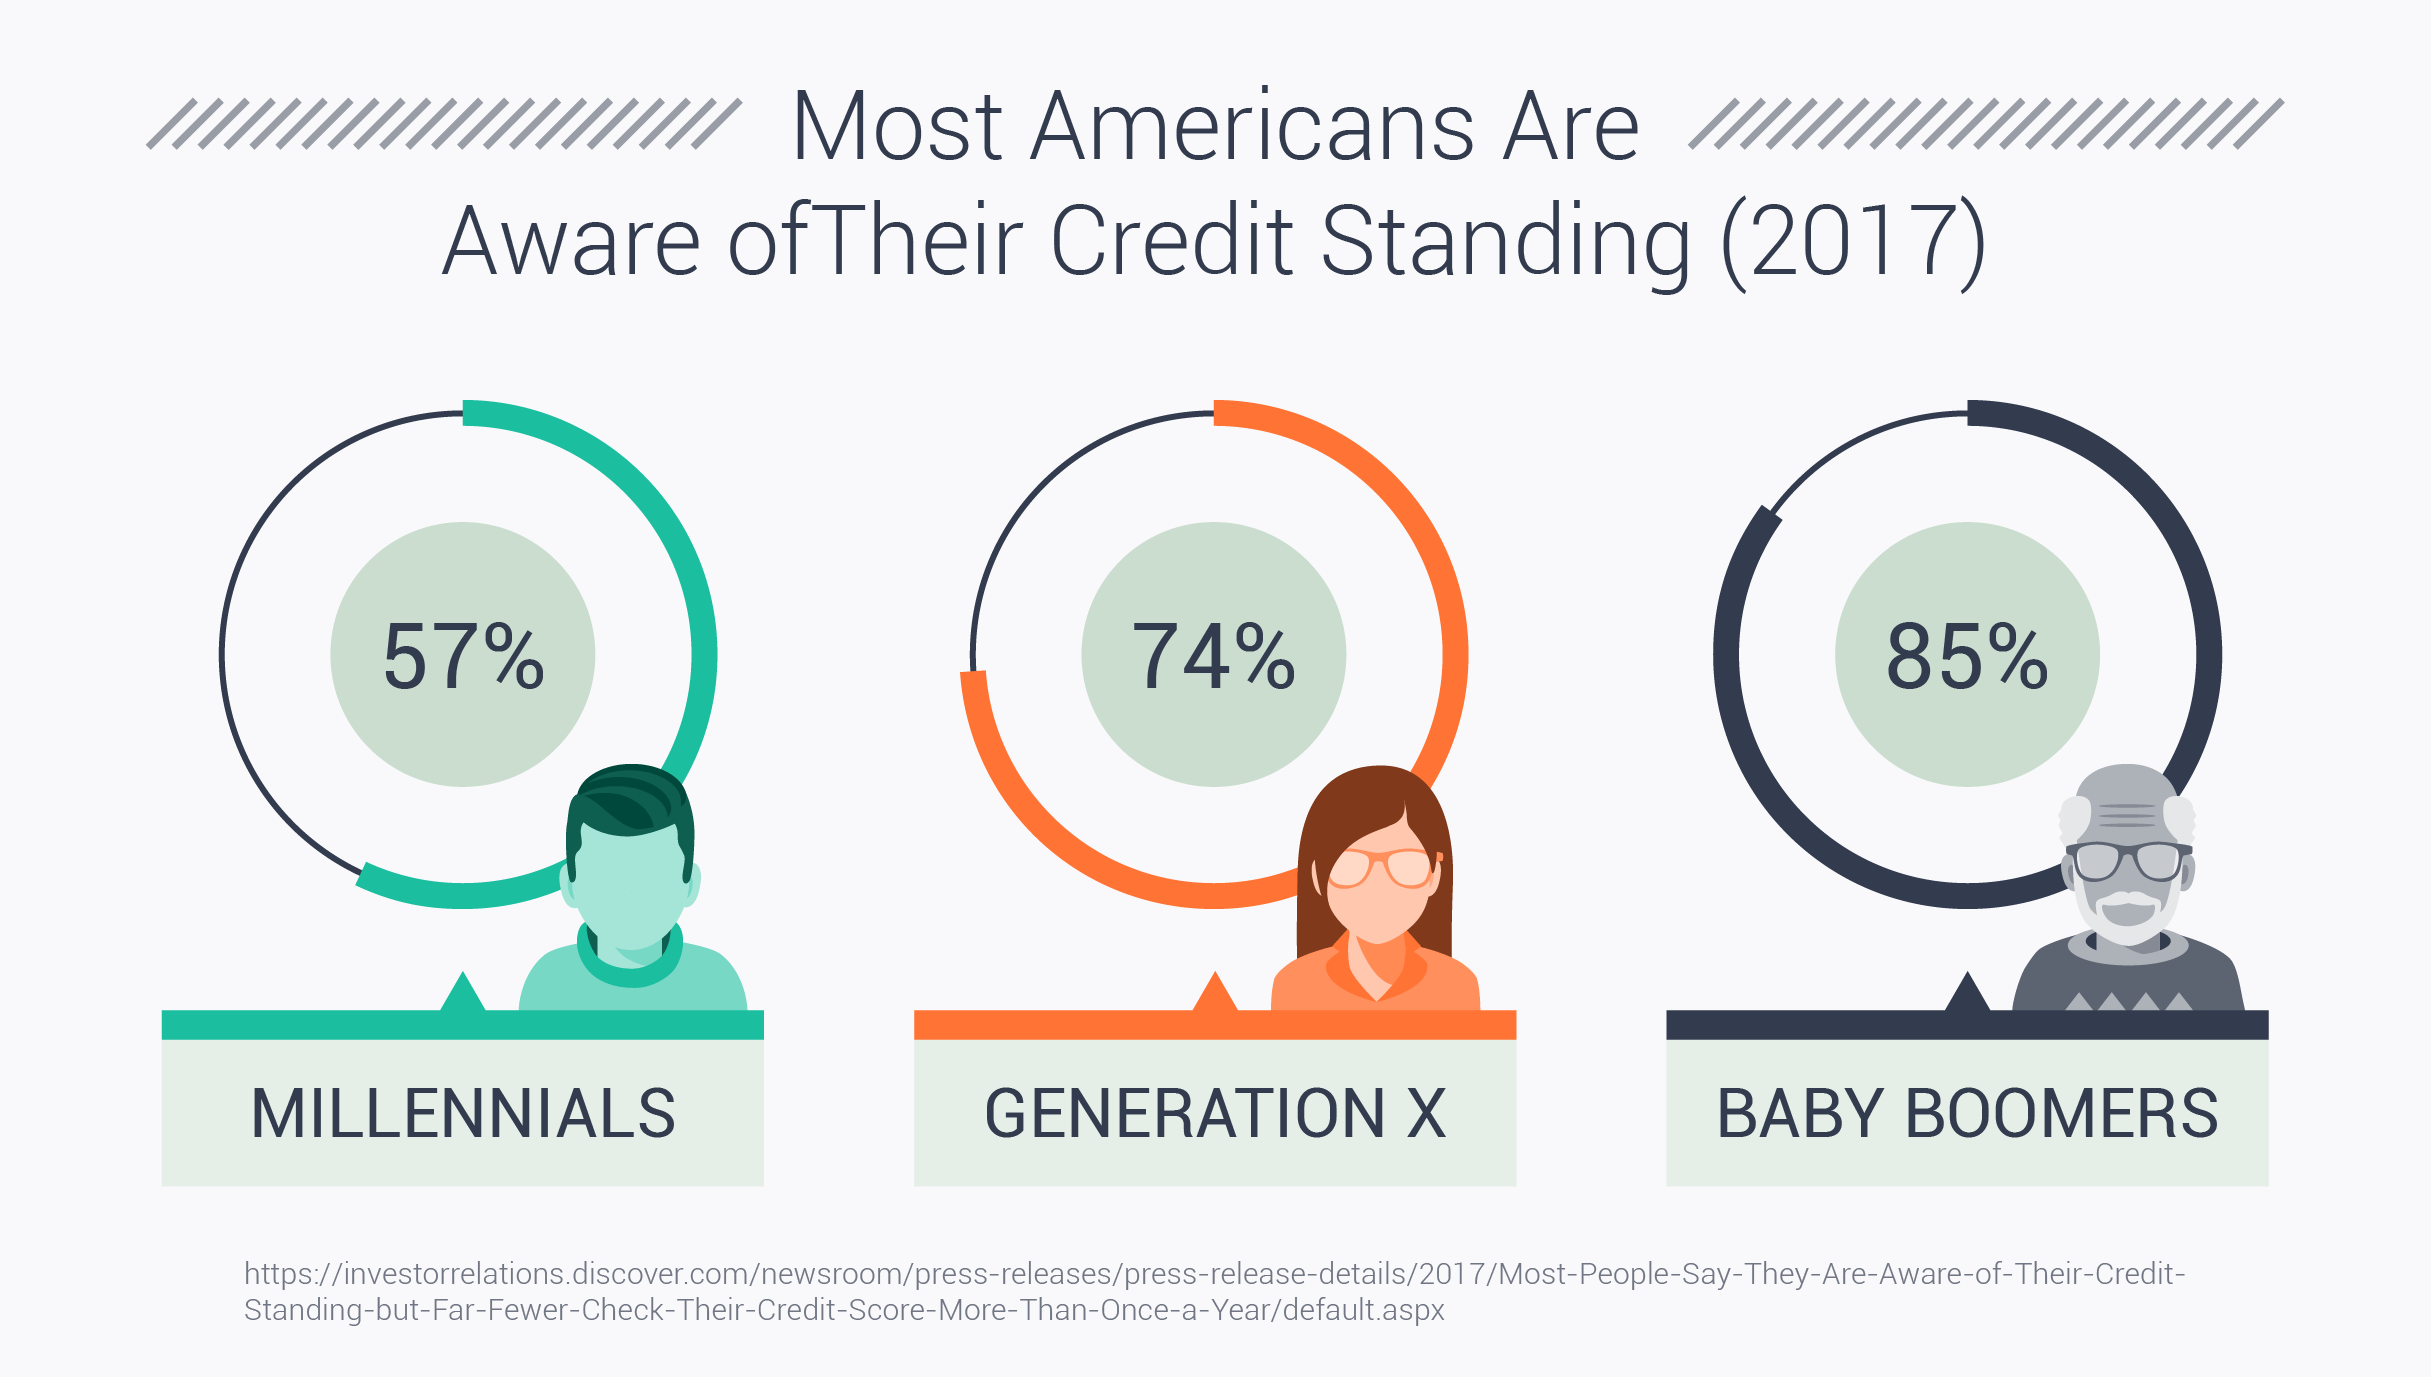 Most Americans Are Aware of Their Credit Standing (2017)